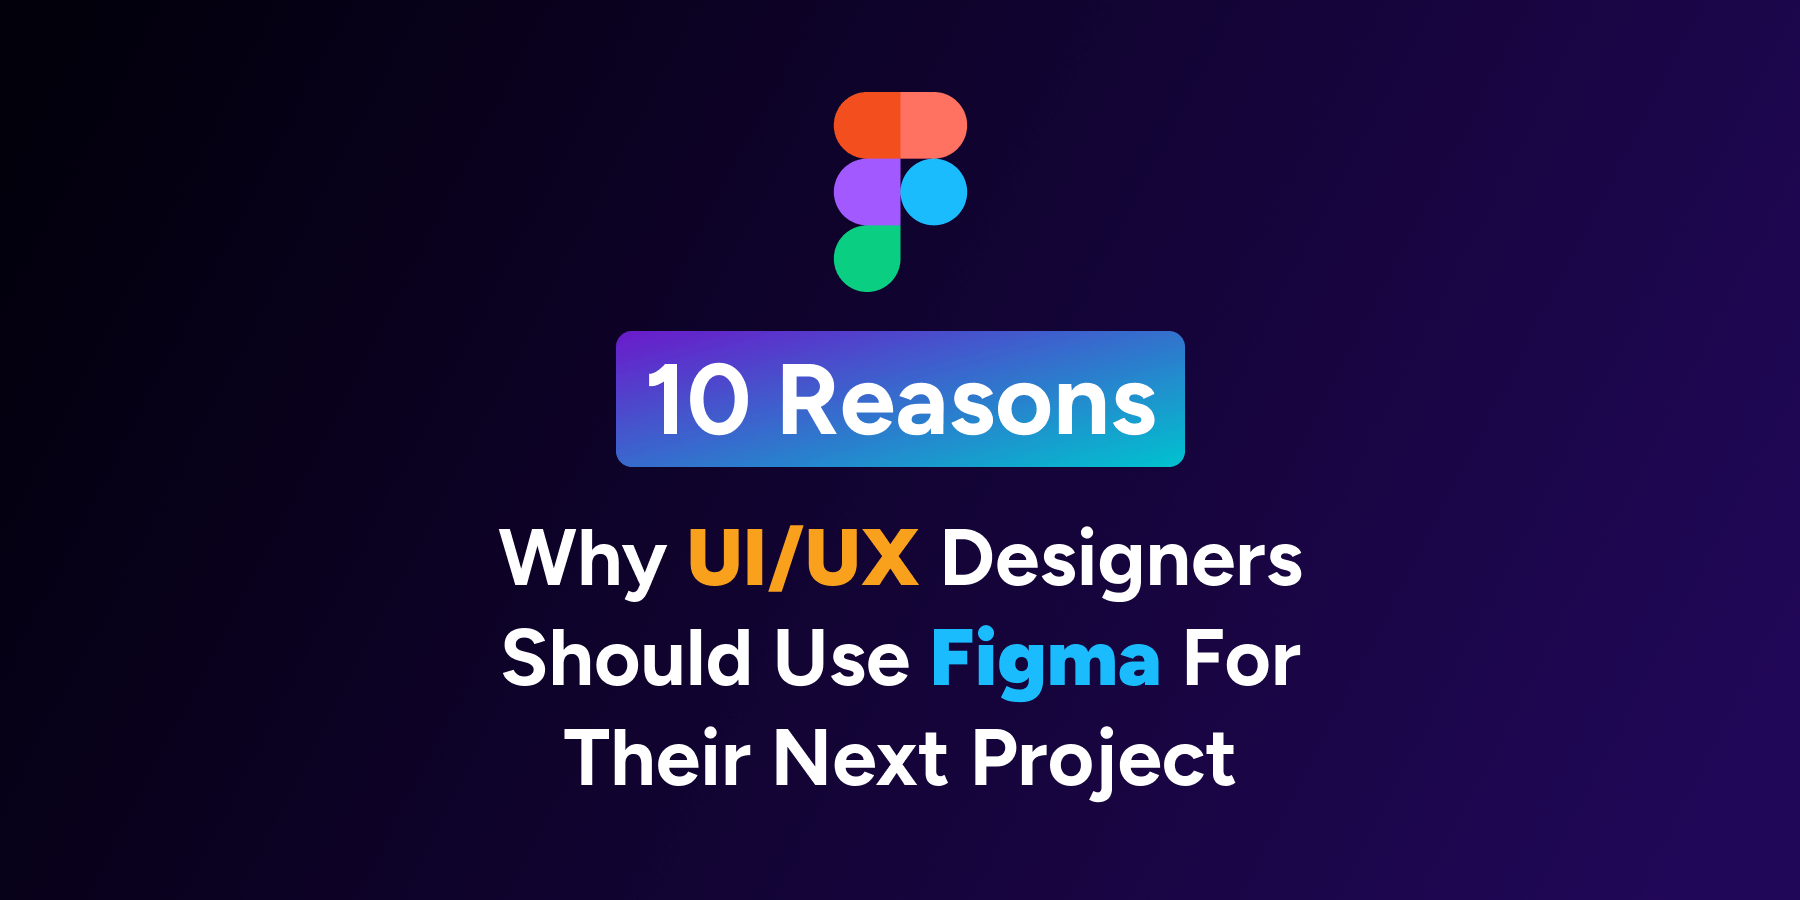 10 Reasons Why UI/UX Designers Should Use Figma For Their Next Project